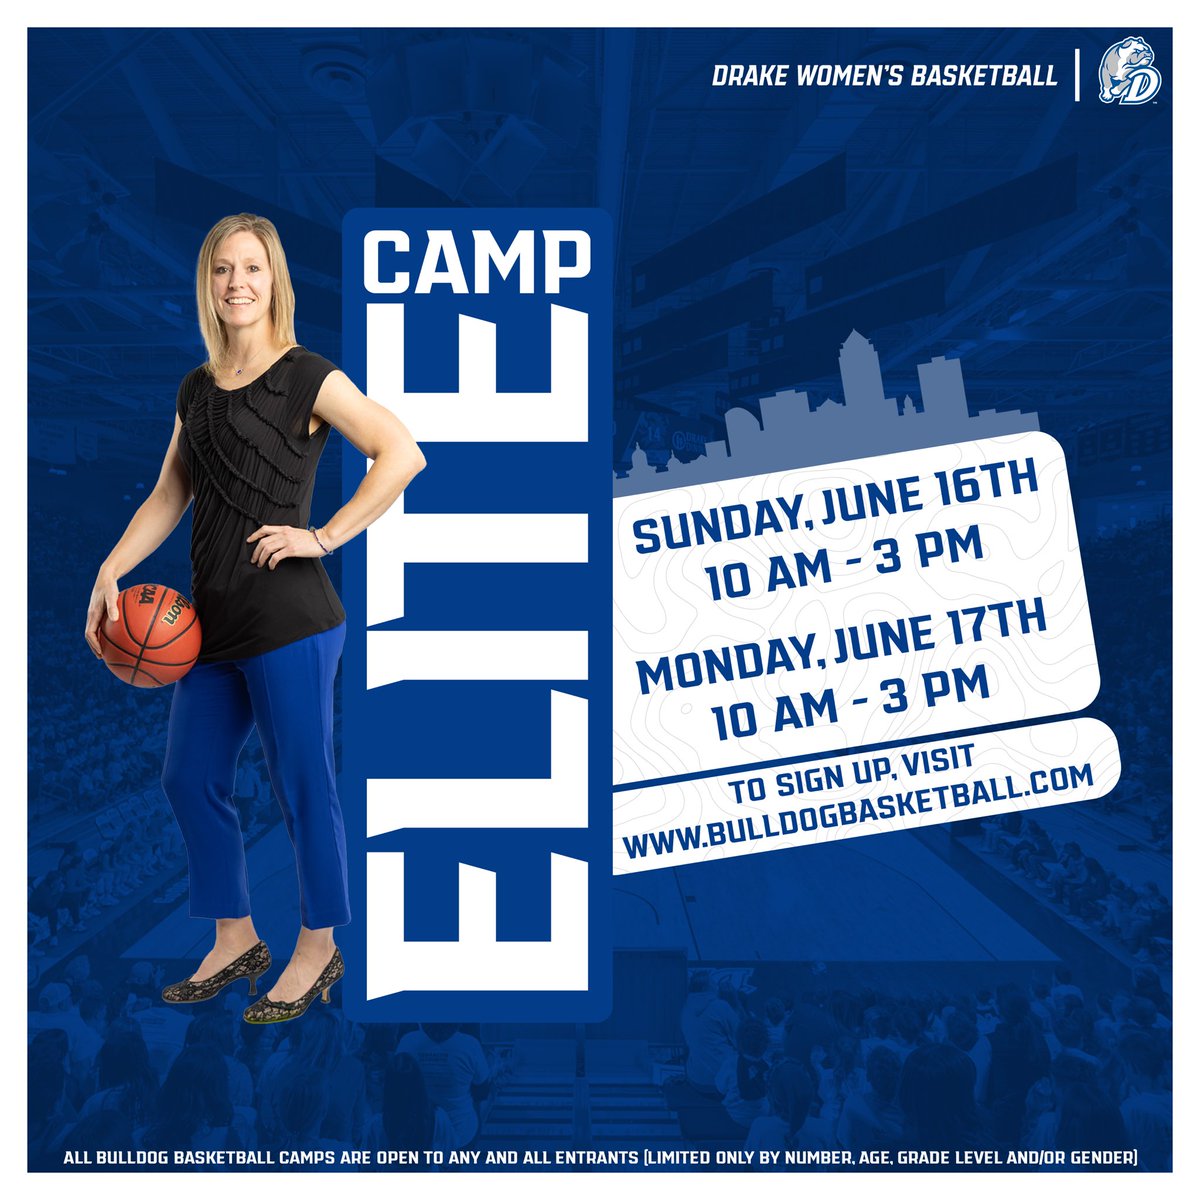 Join us for 𝐄𝐥𝐢𝐭𝐞 𝐂𝐚𝐦𝐩 this June! 🔗 to sign up: bulldogbasketball.com #BeBlue